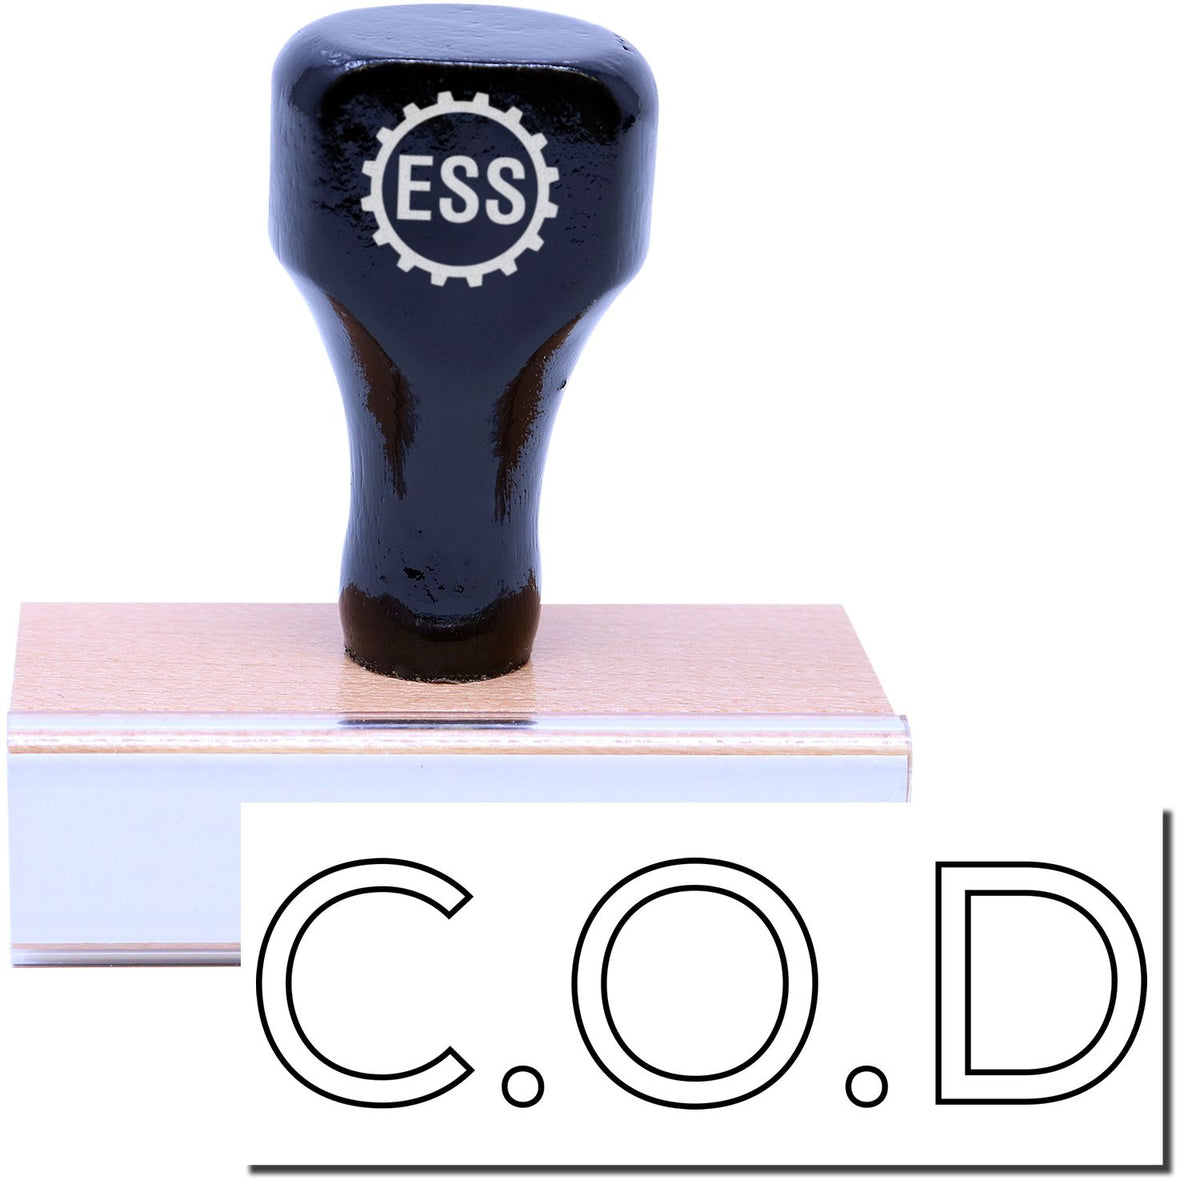 A stock office rubber stamp with a stamped image showing how the text &quot;C.O.D&quot; in an outline font is displayed after stamping.